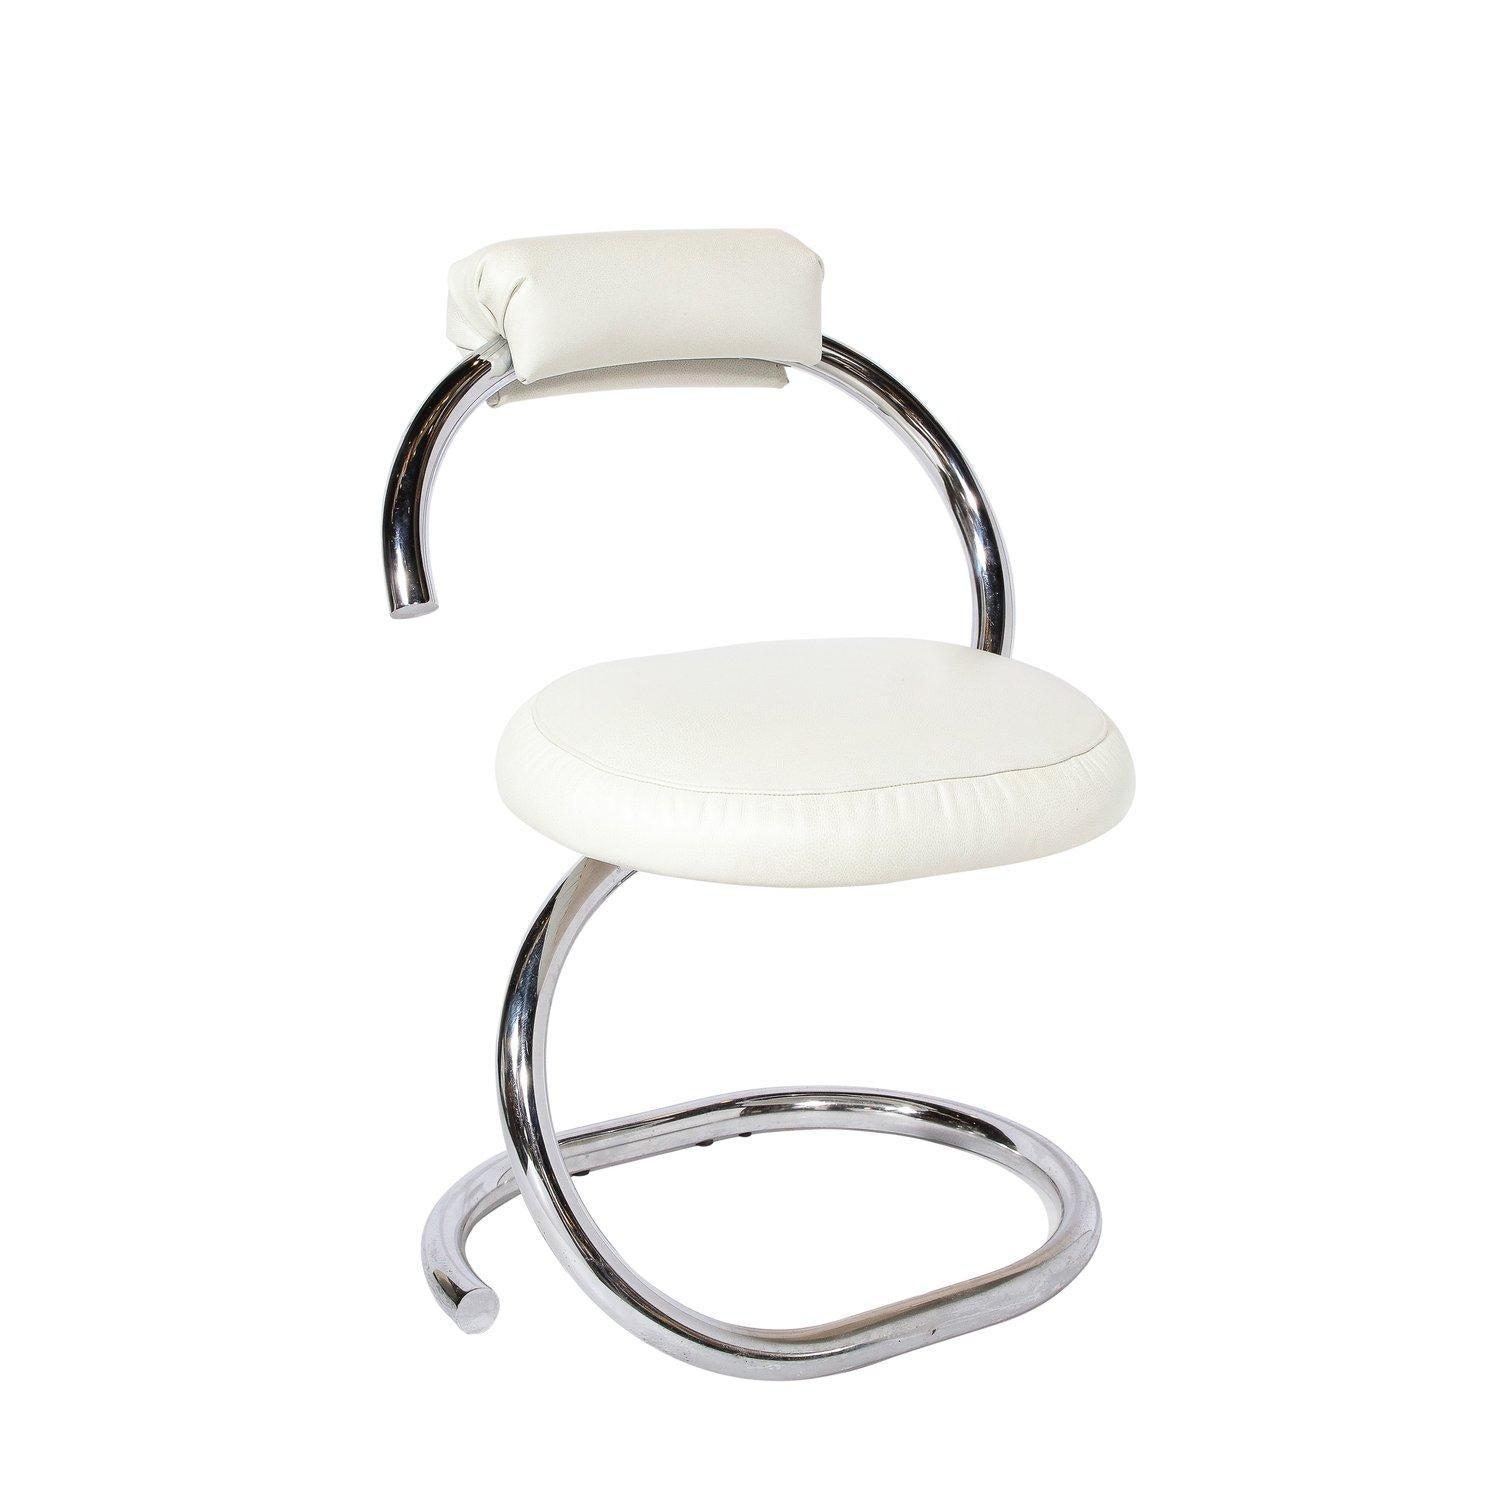 This Pair of Cobra chairs designed by Giotto Stoppino originates from Italy, circa 1970. A standout example of mid-century modernist design, these chairs are constructed of a single piece of aluminum that forms the base, seat and back. The amazing